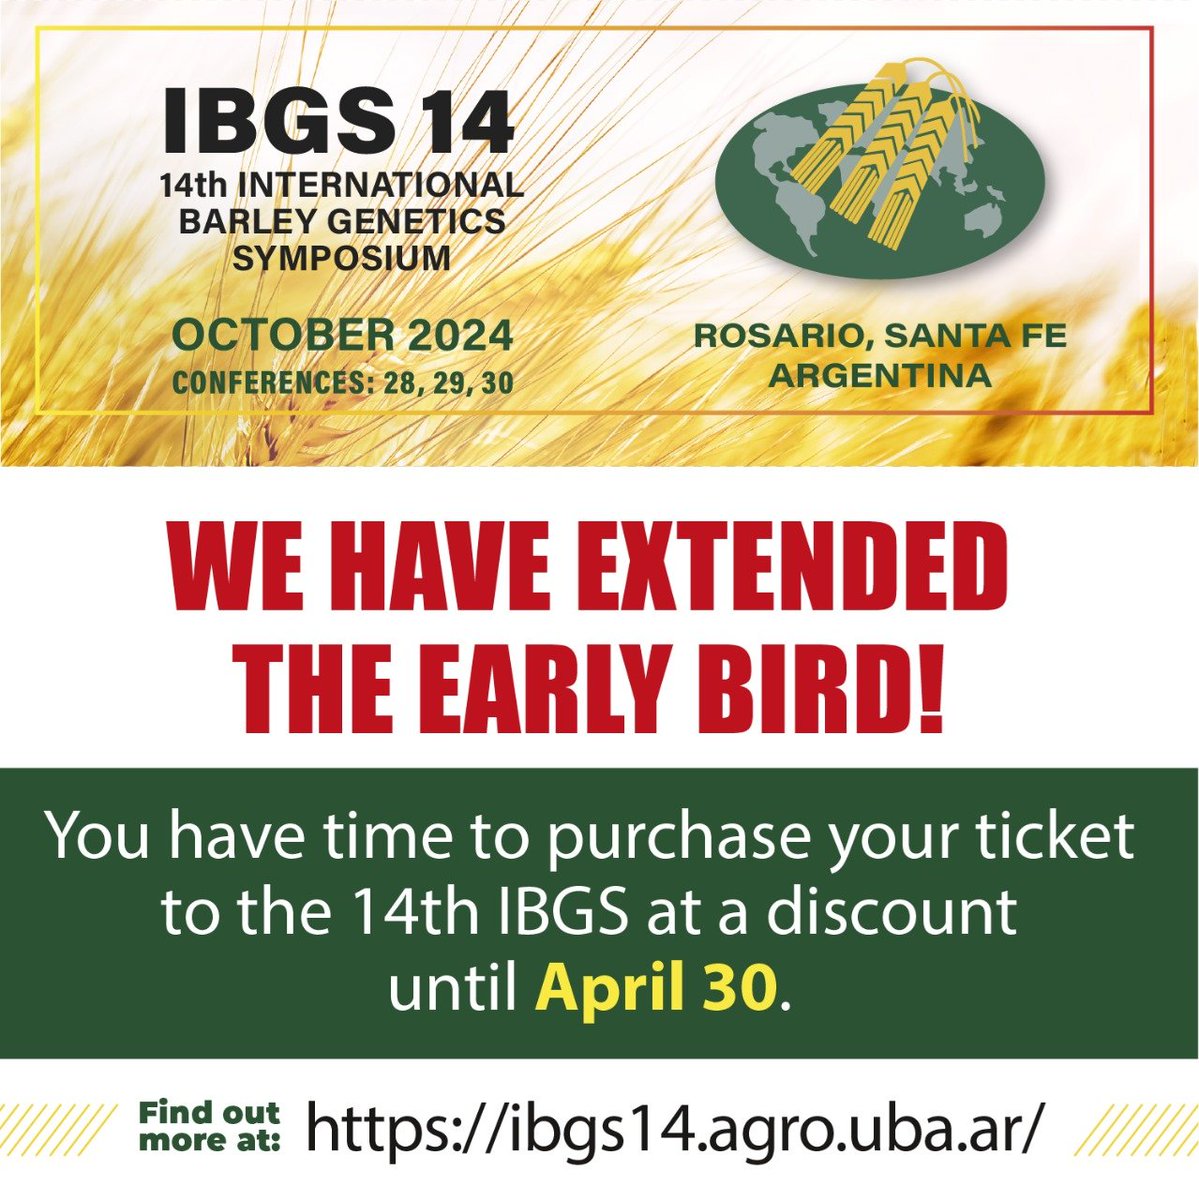 Early Bird registration deadline extended until April 30 for IBGS14 ibgs14.agro.uba.ar , #barley